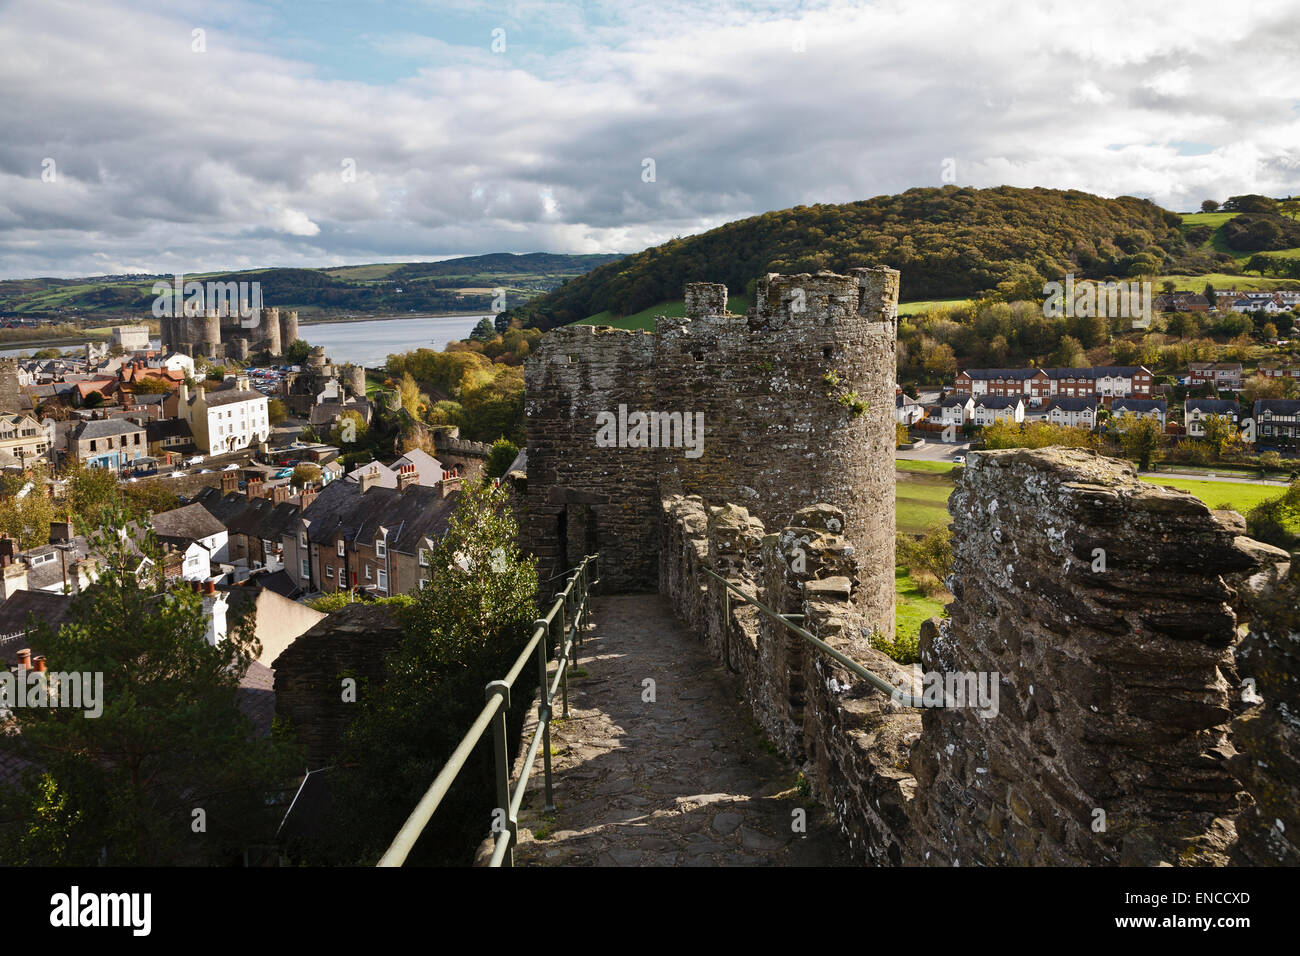 View from the town walls, Conwy, Wales Stock Photo